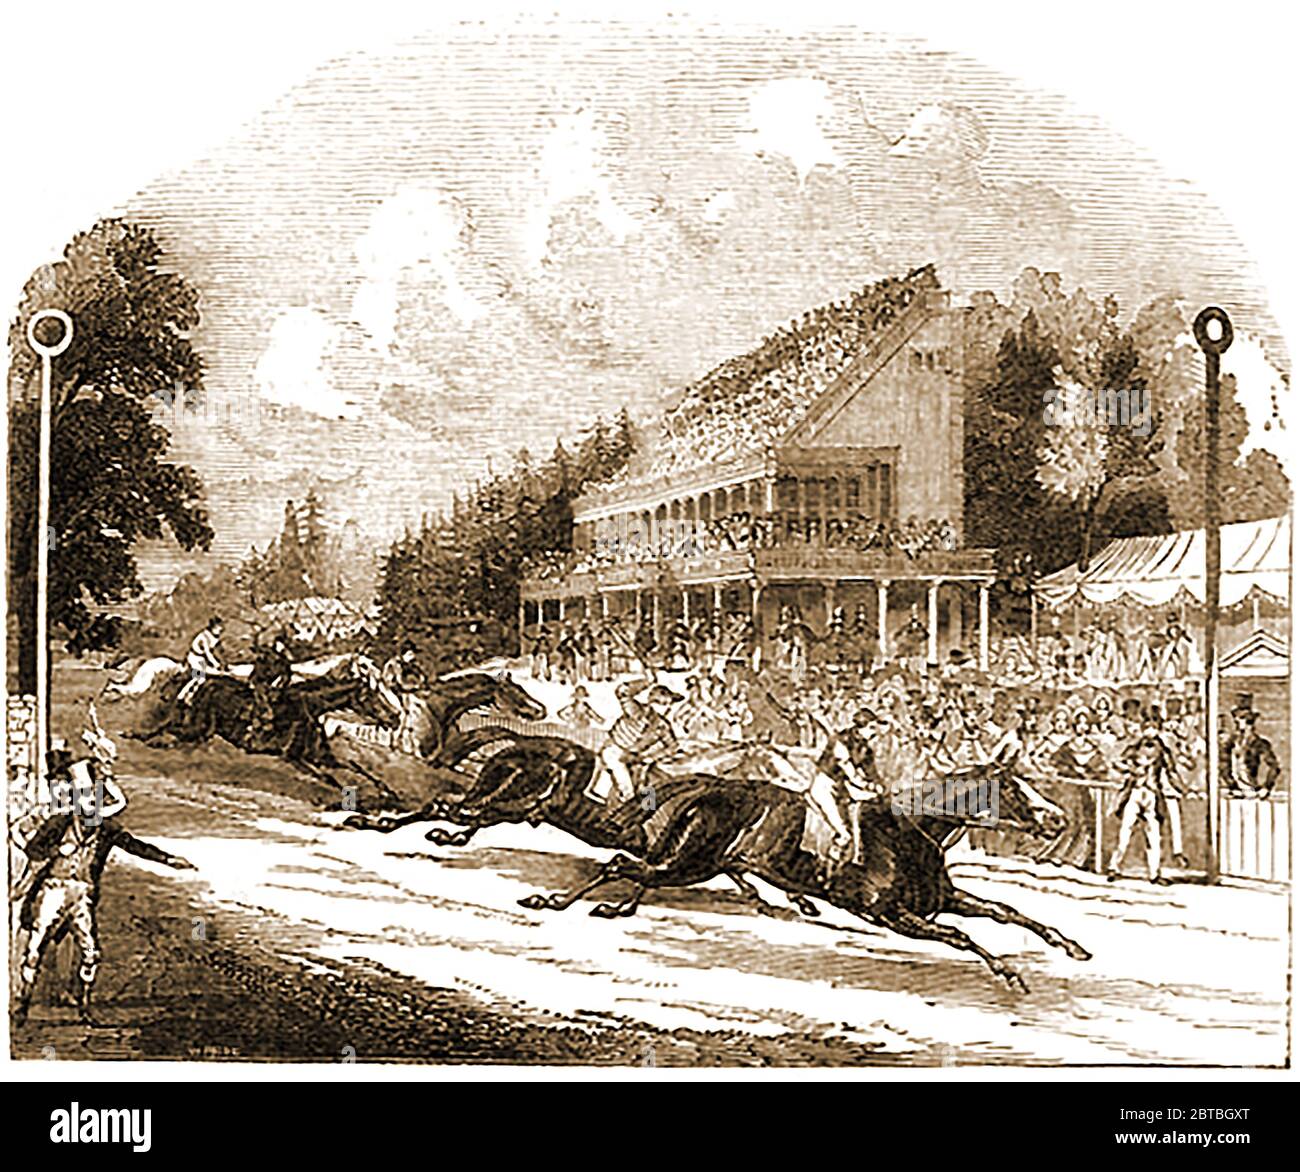 An 1842 engraving of the closing stages of a horse race at Goodwood UK, illustrating the (then) new grandstand. The course was originally known at ‘The Harroway’ and is  credited with being renowned as the world’s most beautiful racecourse, set as it is  with the South Downs as its backdrop. Nearby is Trundle Iron Age hill fort,  used as an informal grandstand to watch races.  The  Duke of Richmond, Colonel of the Sussex Militia. introduced the course to   for the benefit of the officers of the Sussex Militia. Stock Photo